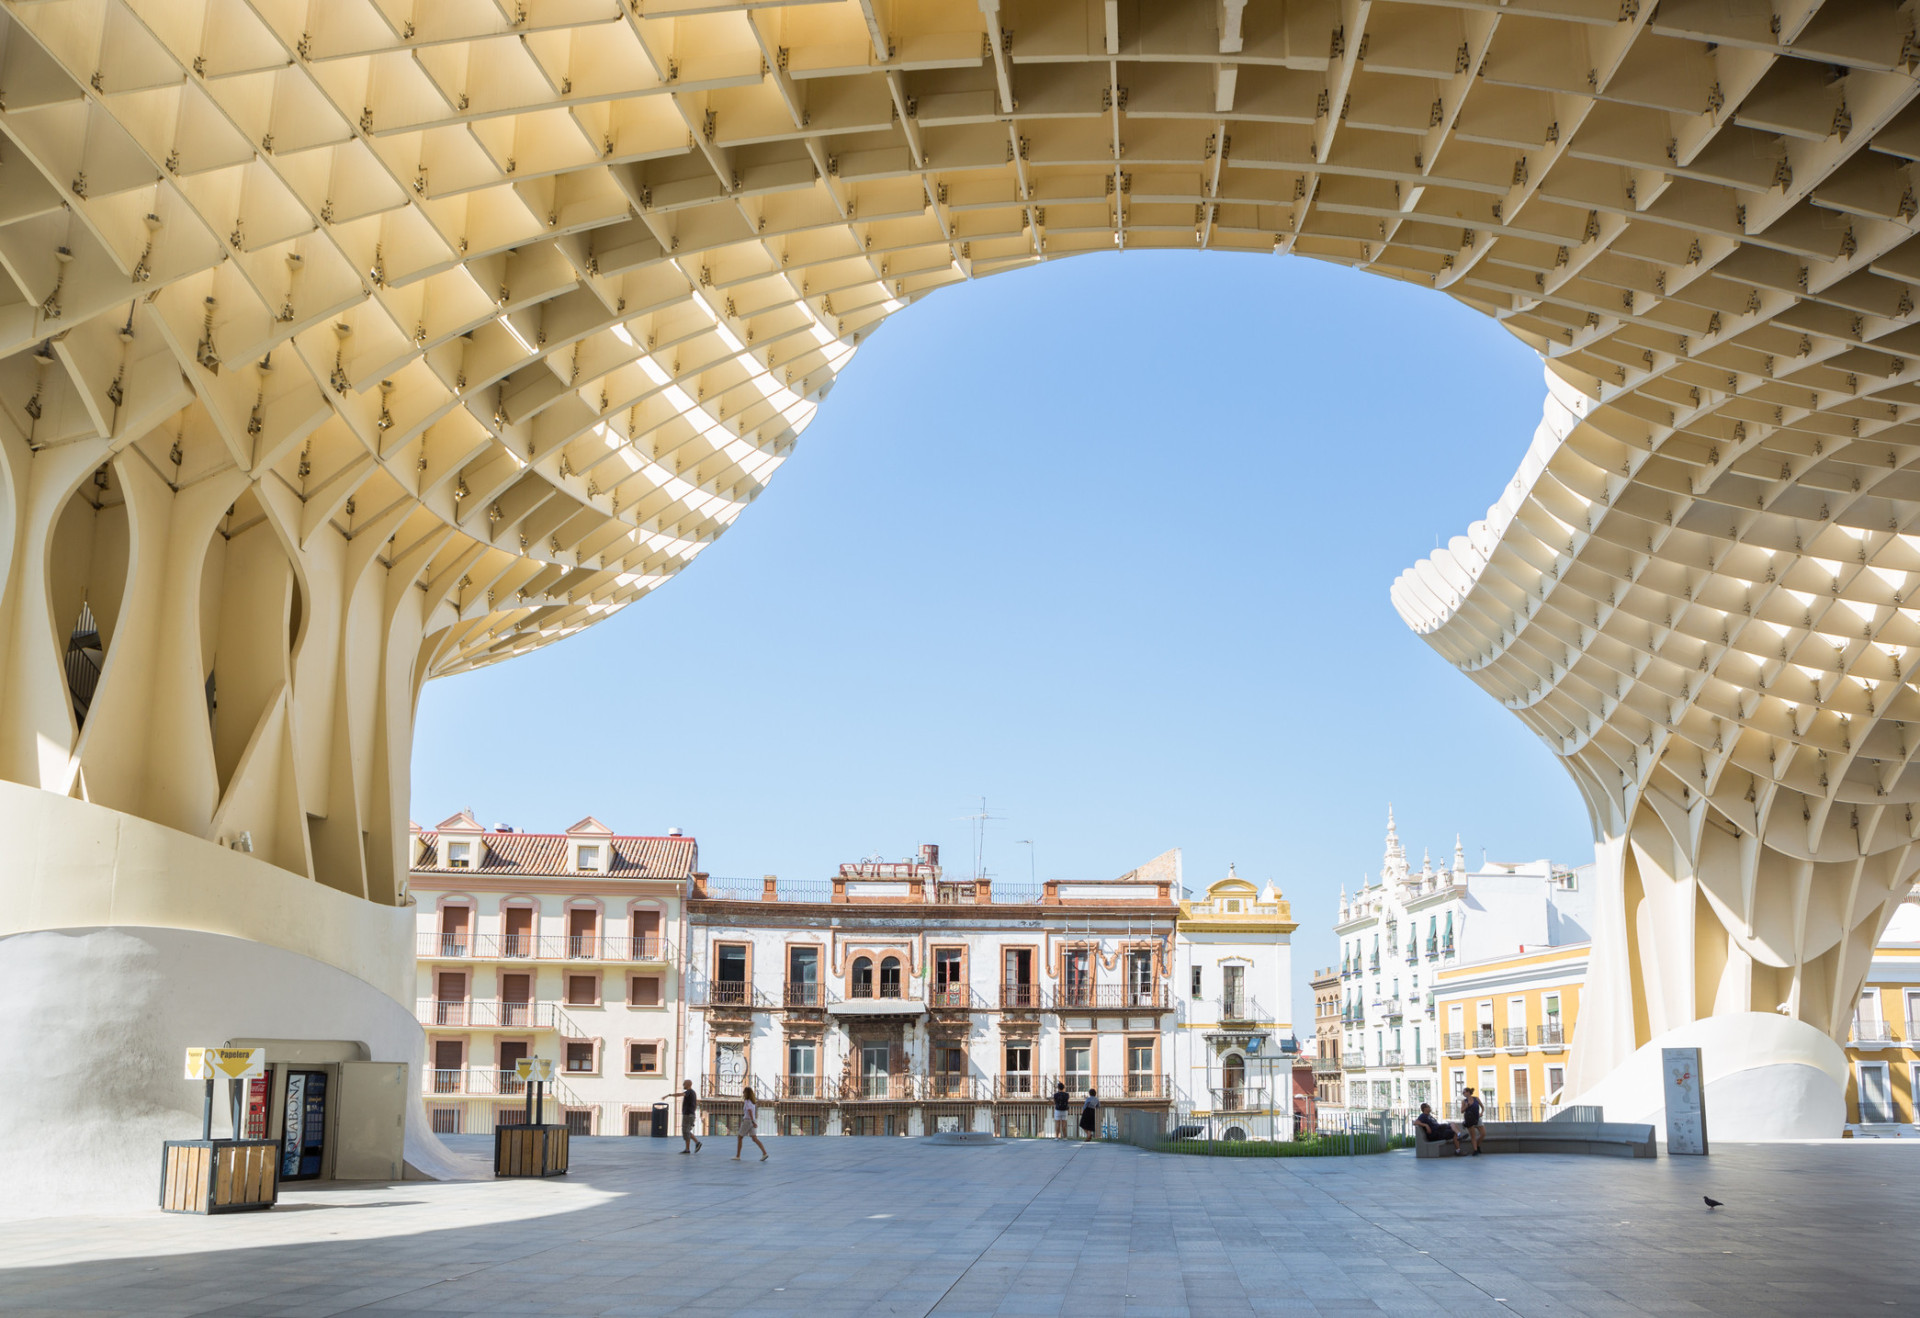 The Andalusian city of Seville has an incredible blend of modern, Moorish, Jewish, and Spanish architecture and culture.